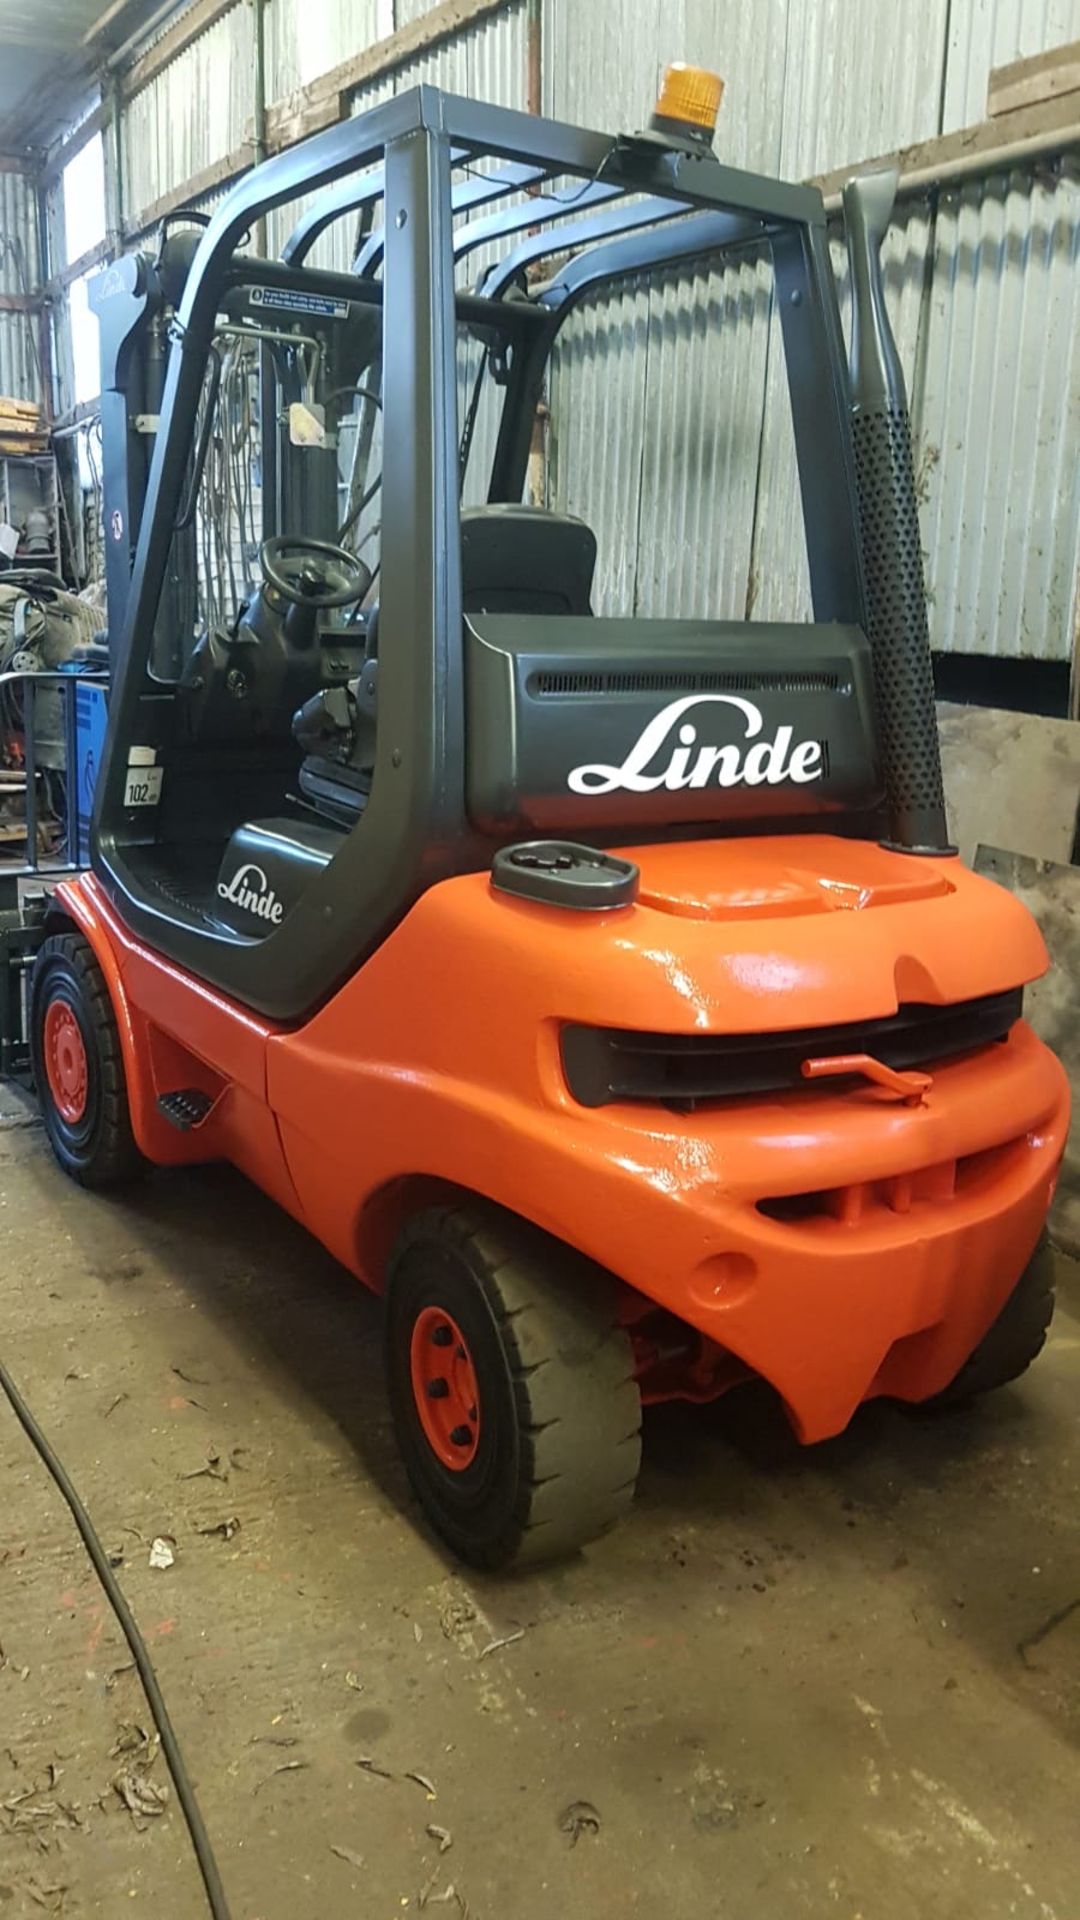 LINDE H25D DIESEL FORKLIFT TRUCK 2.5 TONNE RATED, CONTAINER SPEC 3 STAGE MAST WITH SIDESHIFT VENDORS - Image 3 of 3